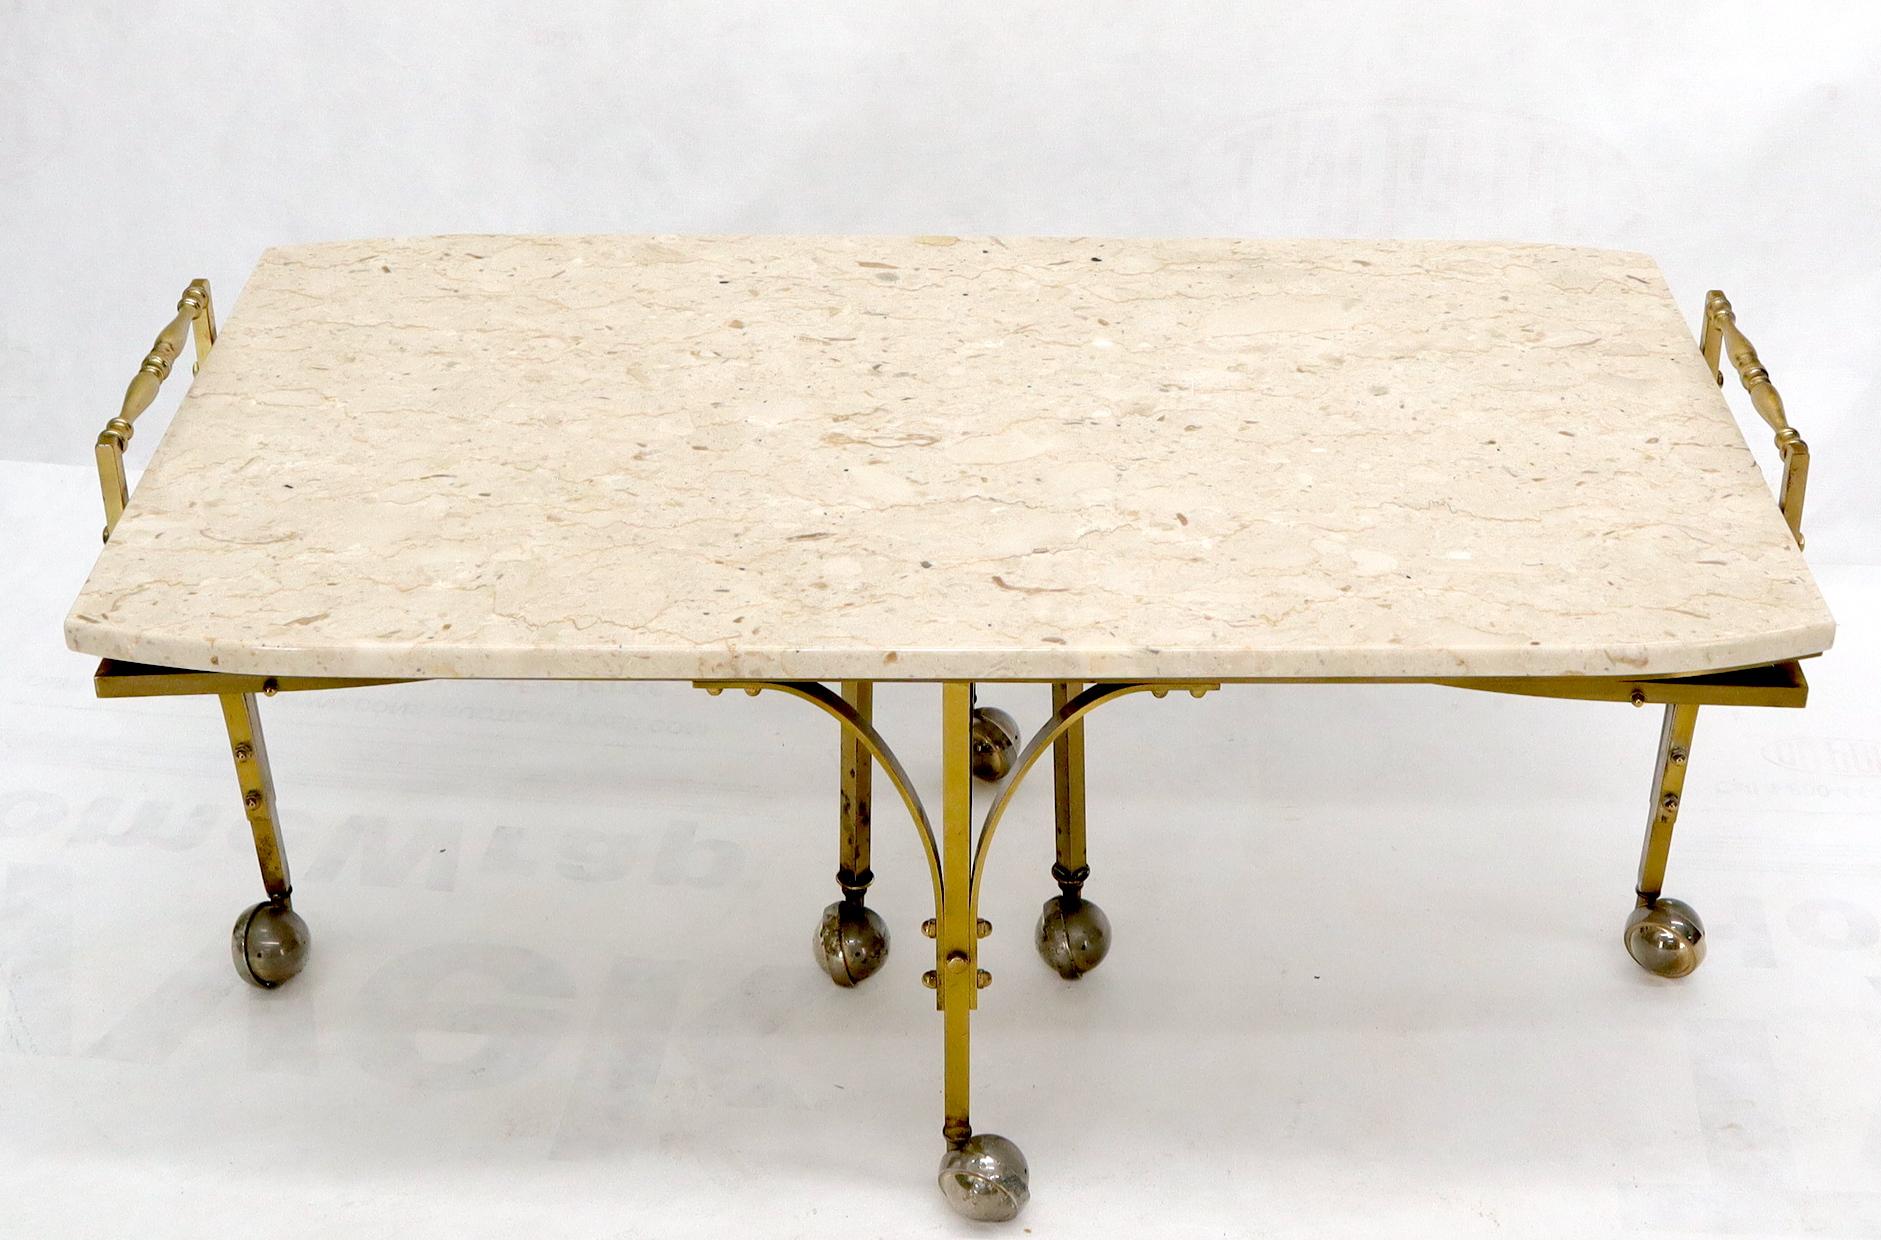 Brass base on wheels travertine top coffee table with iron shape expandable extensions or leaves. Fully adjustable coffee table.